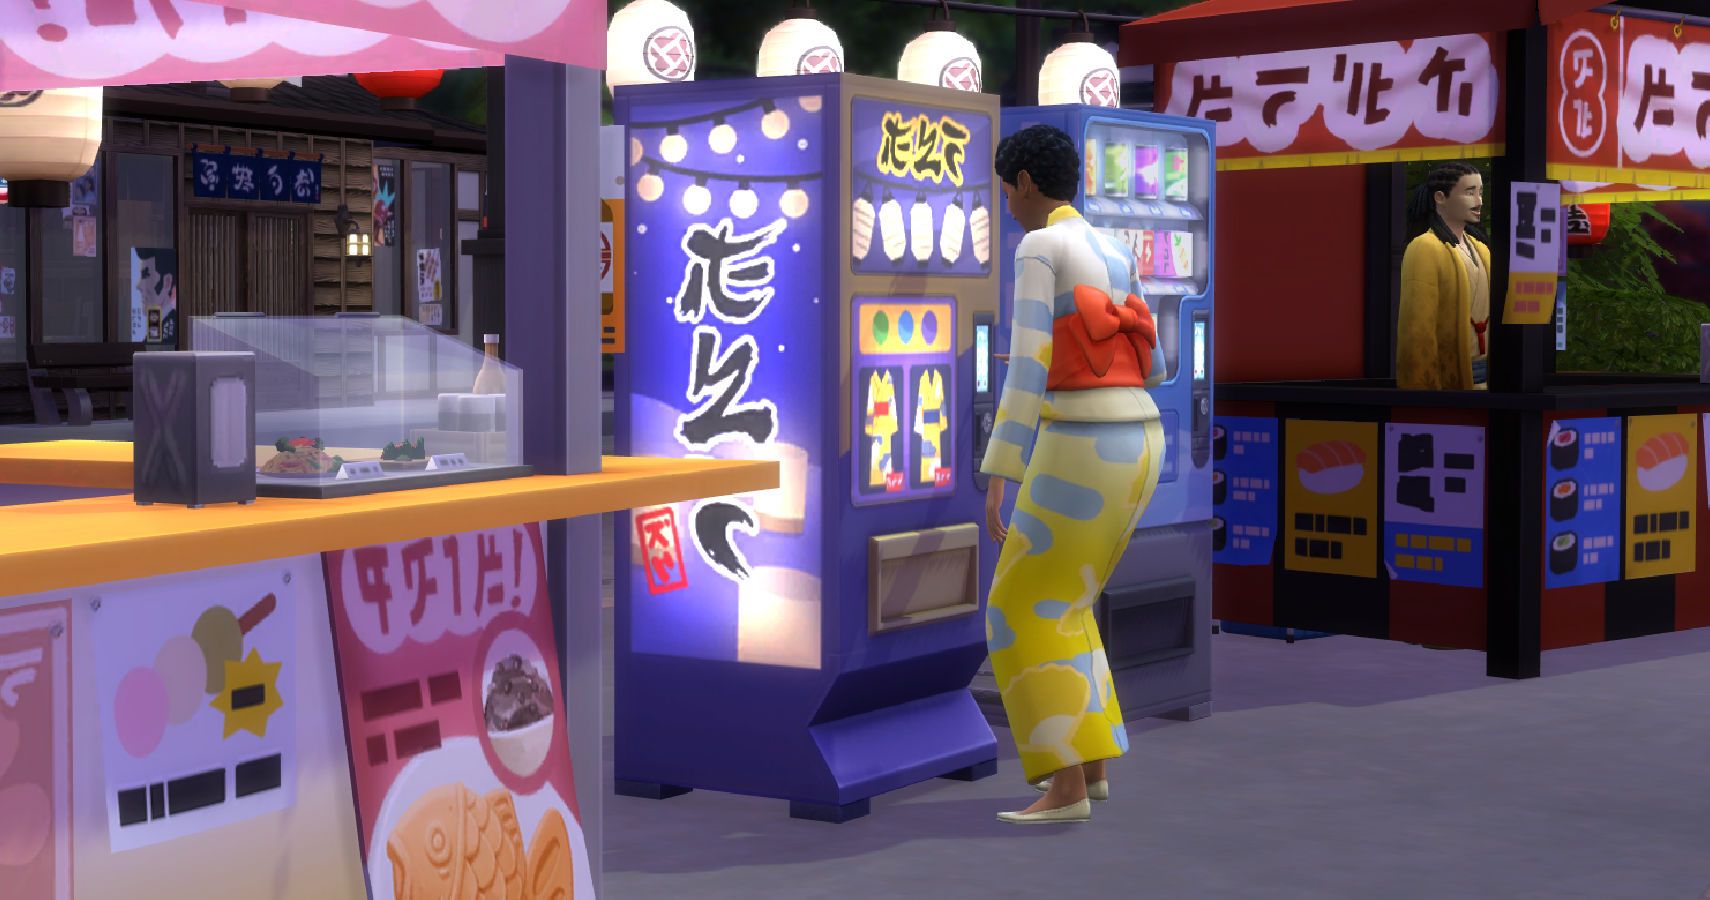 festival of light outfit and vending machine